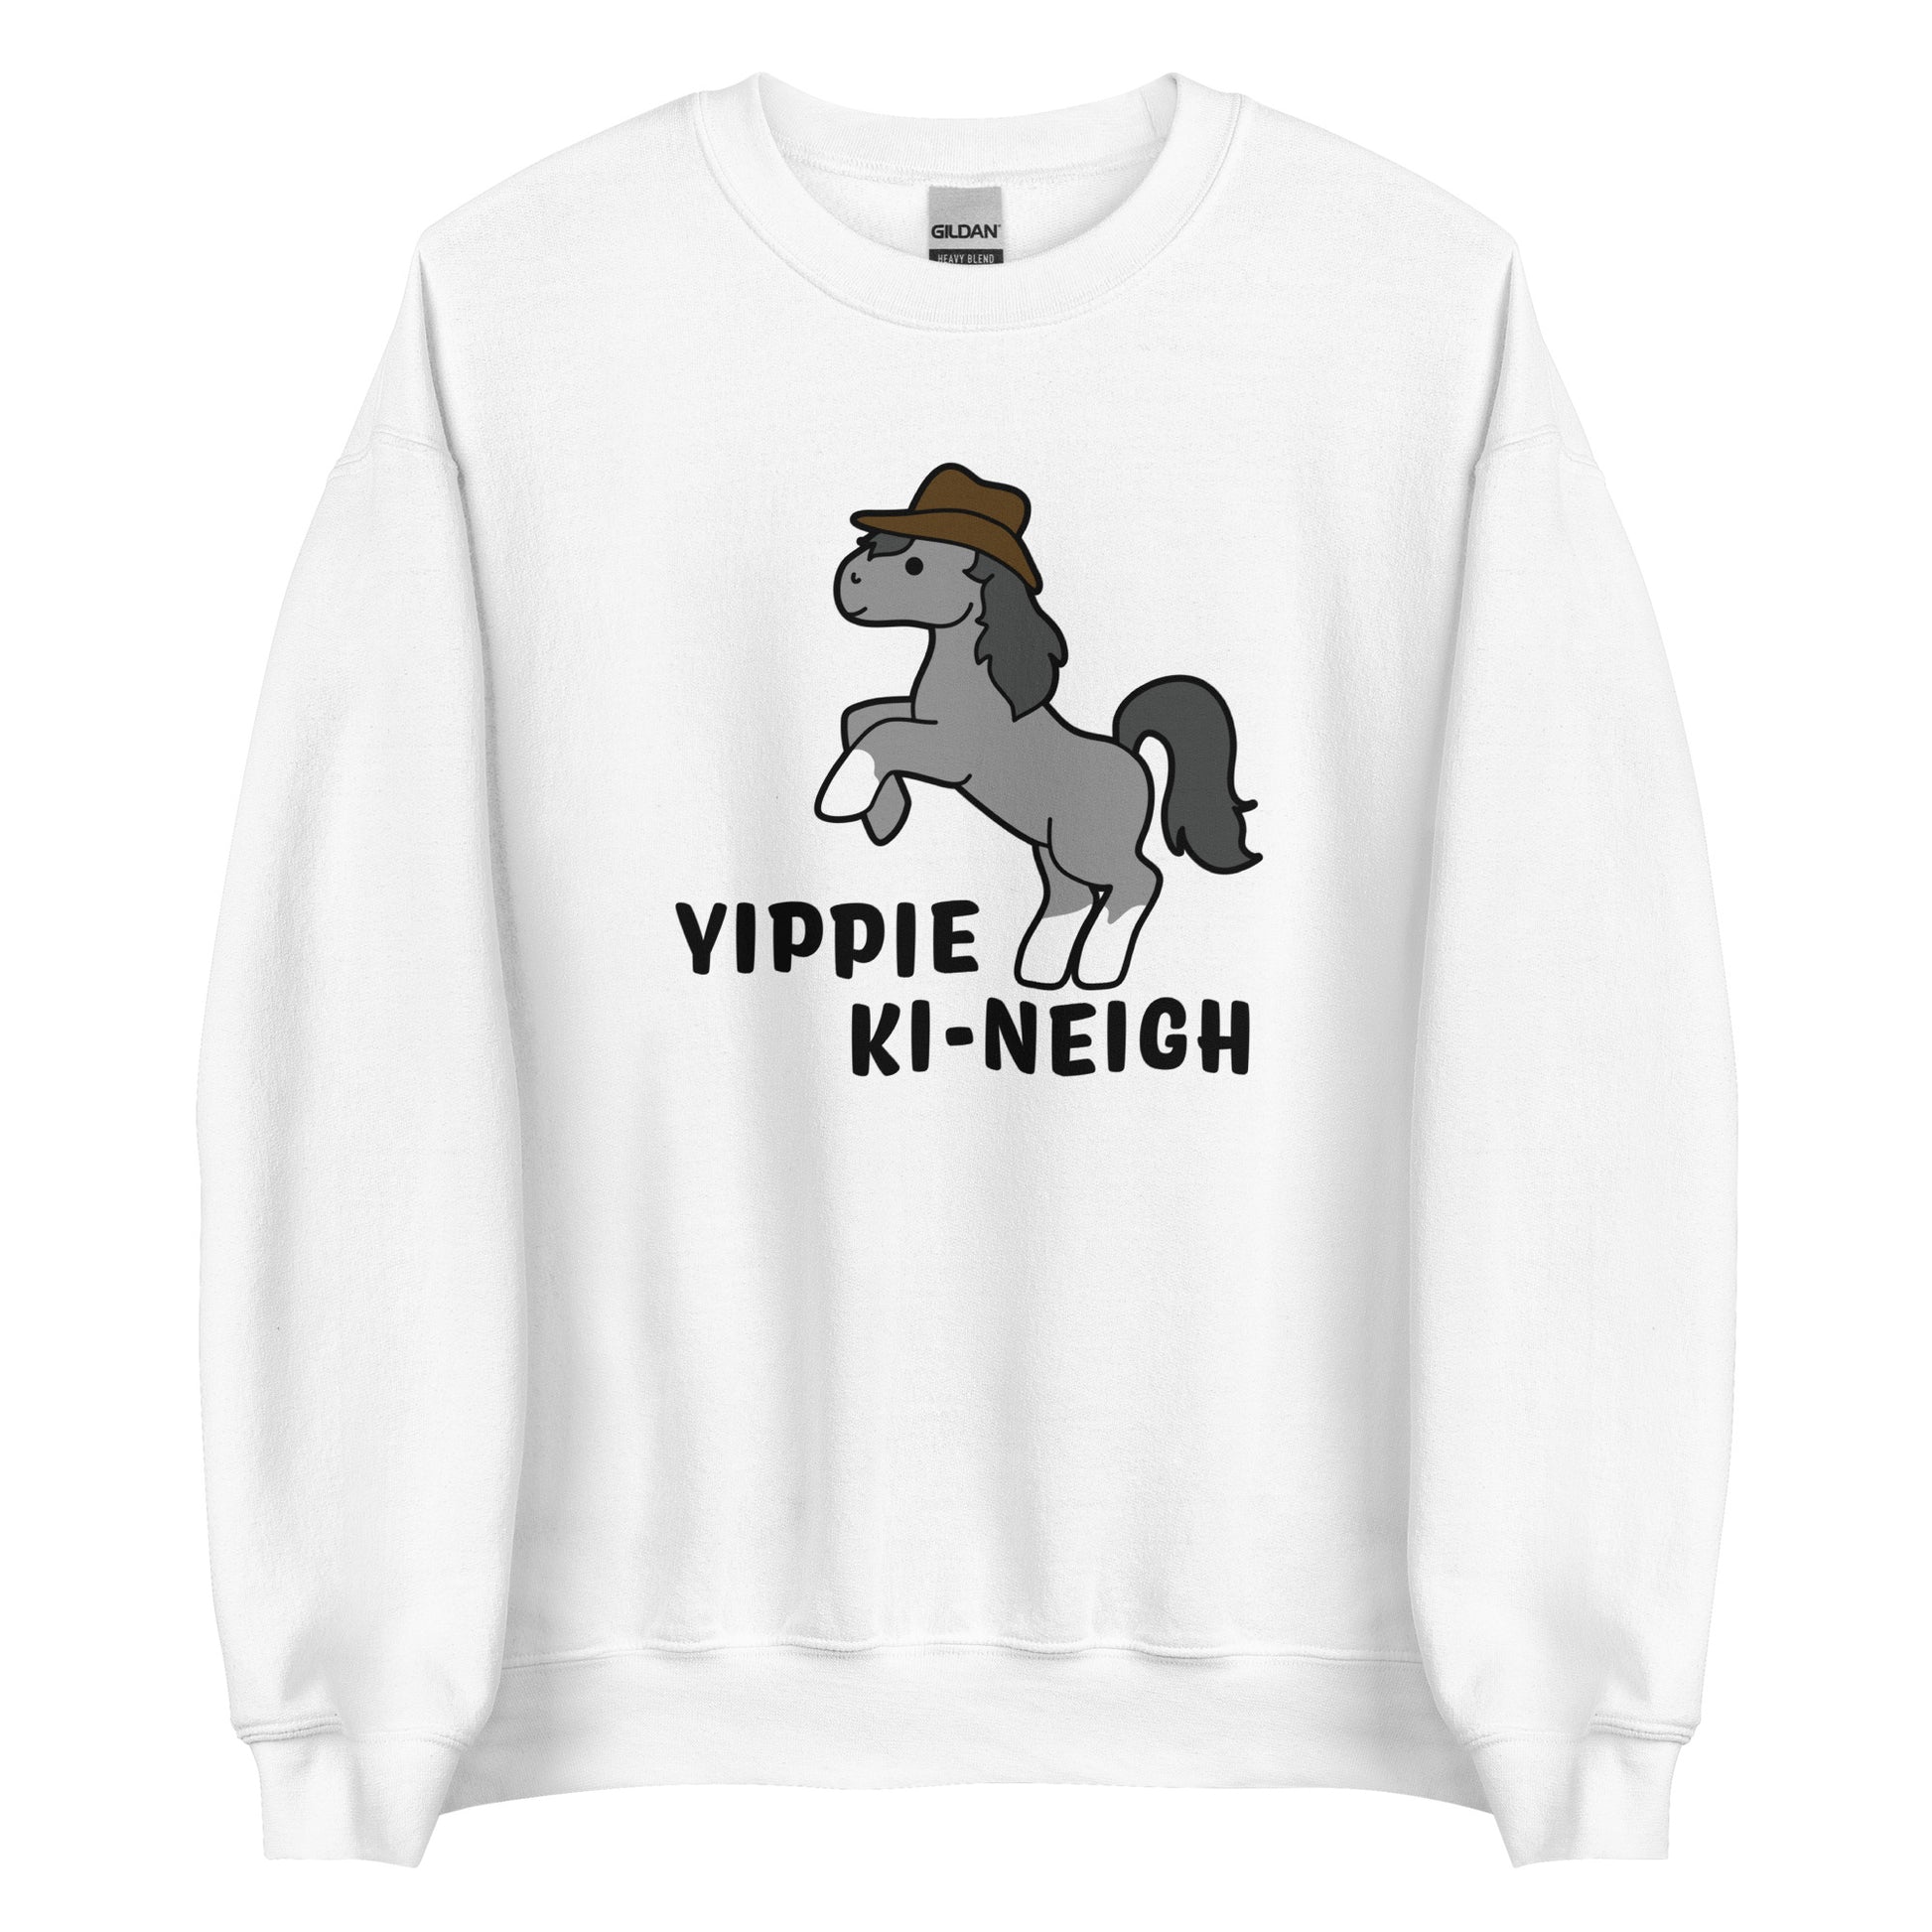 A white crewneck sweatshirt featuring an illustration of a smiling grey pony rearing and wearing a cowboy hat. Text underneath the pony reads "Yippie Ki-Neigh"